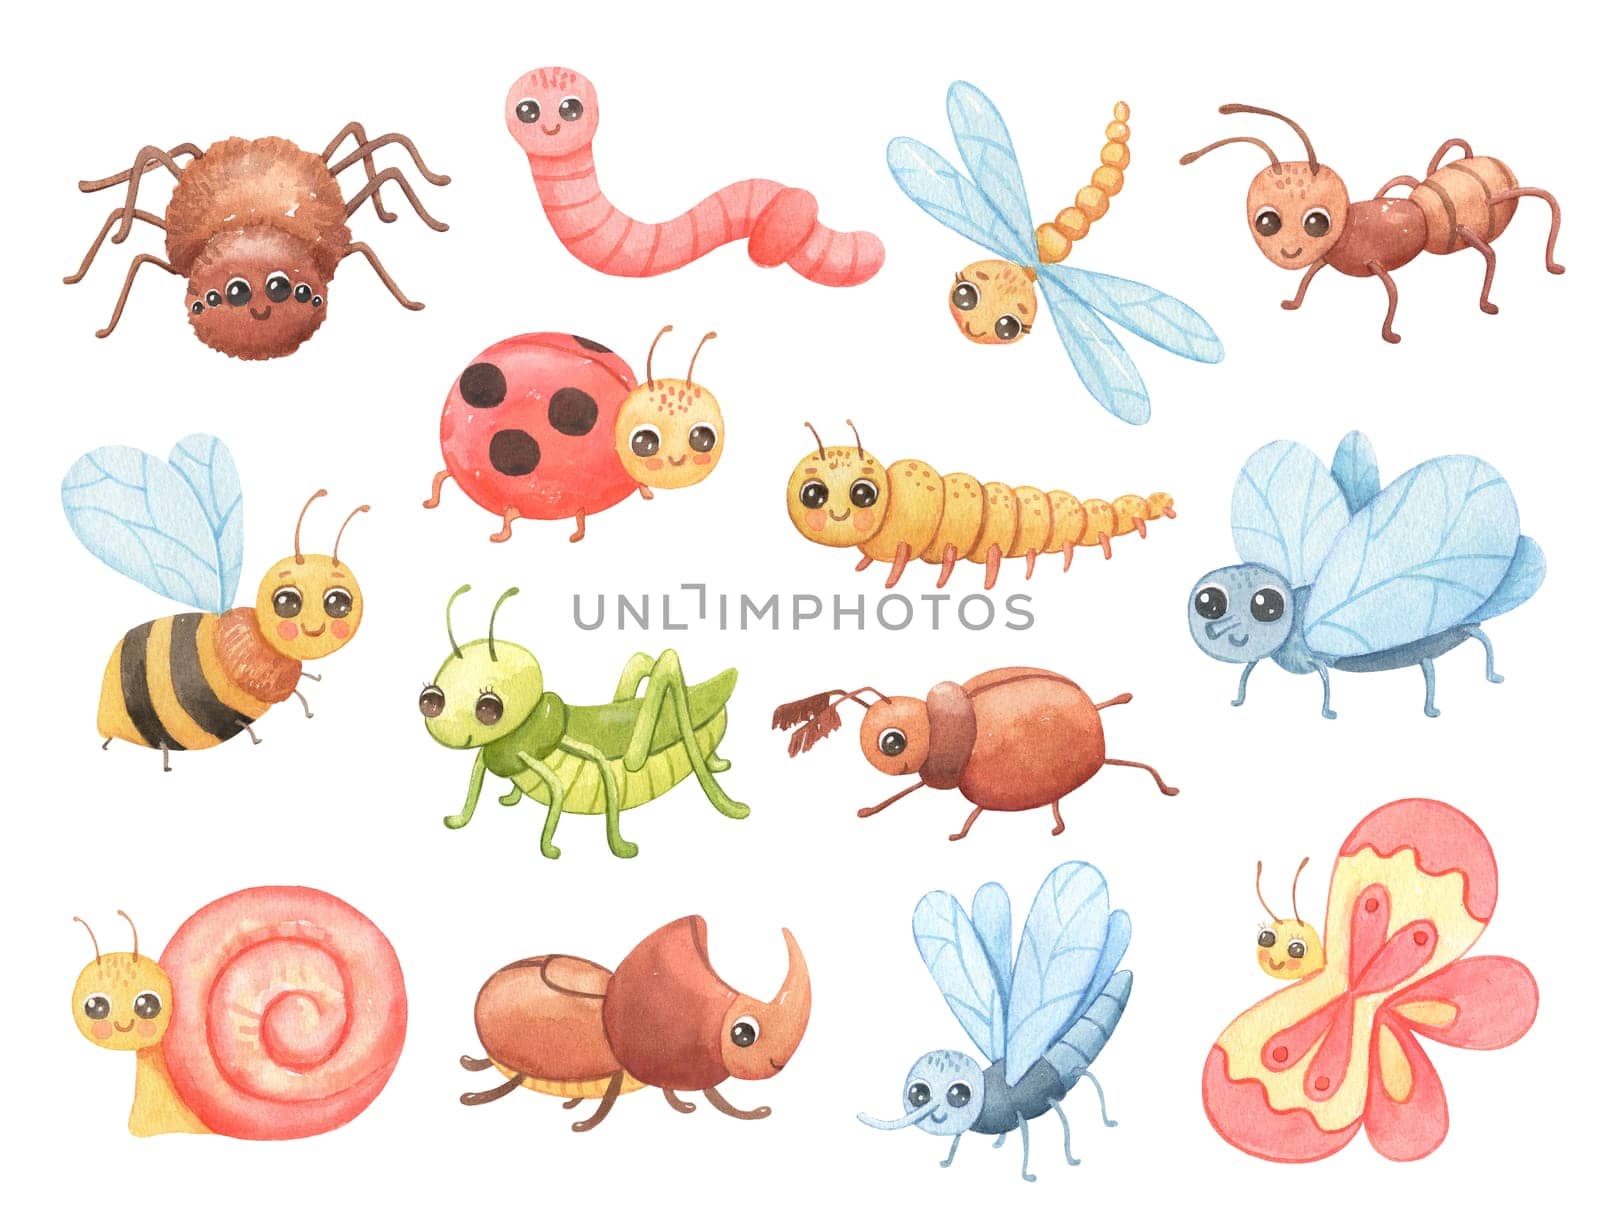 Cartoon insects set. Cute ant, grasshopper and snail. Childish watercolor illustration isolated on white by ElenaPlatova